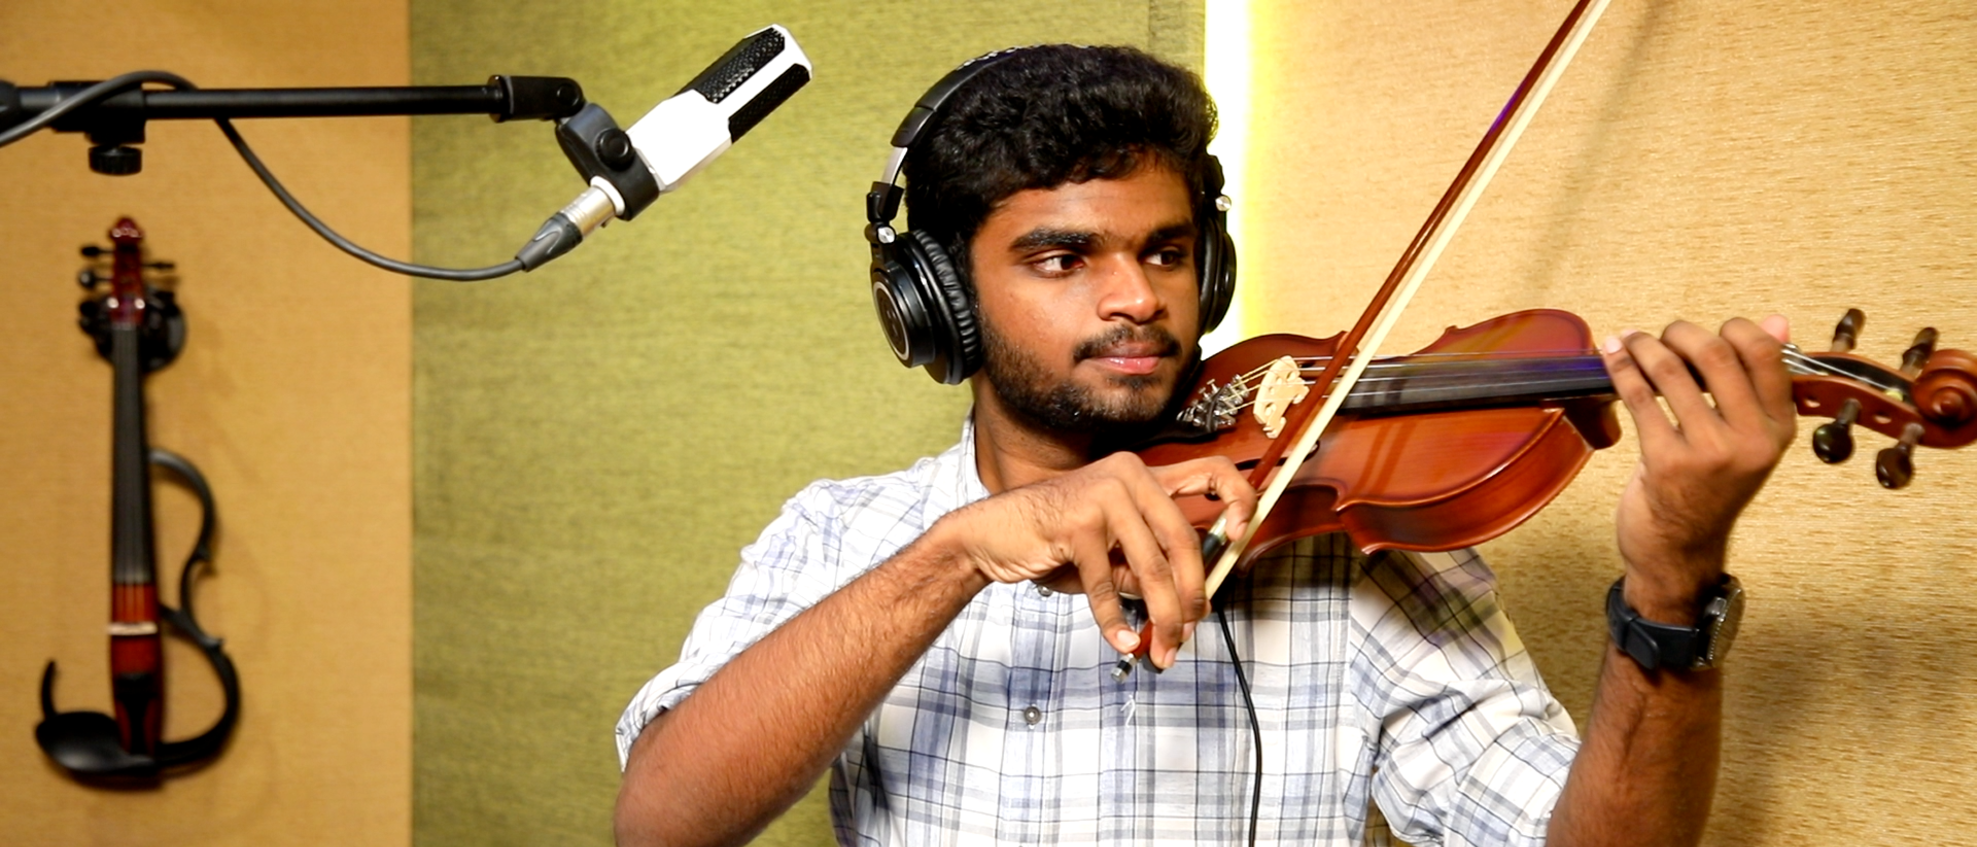  Music Production Courses in chennai
